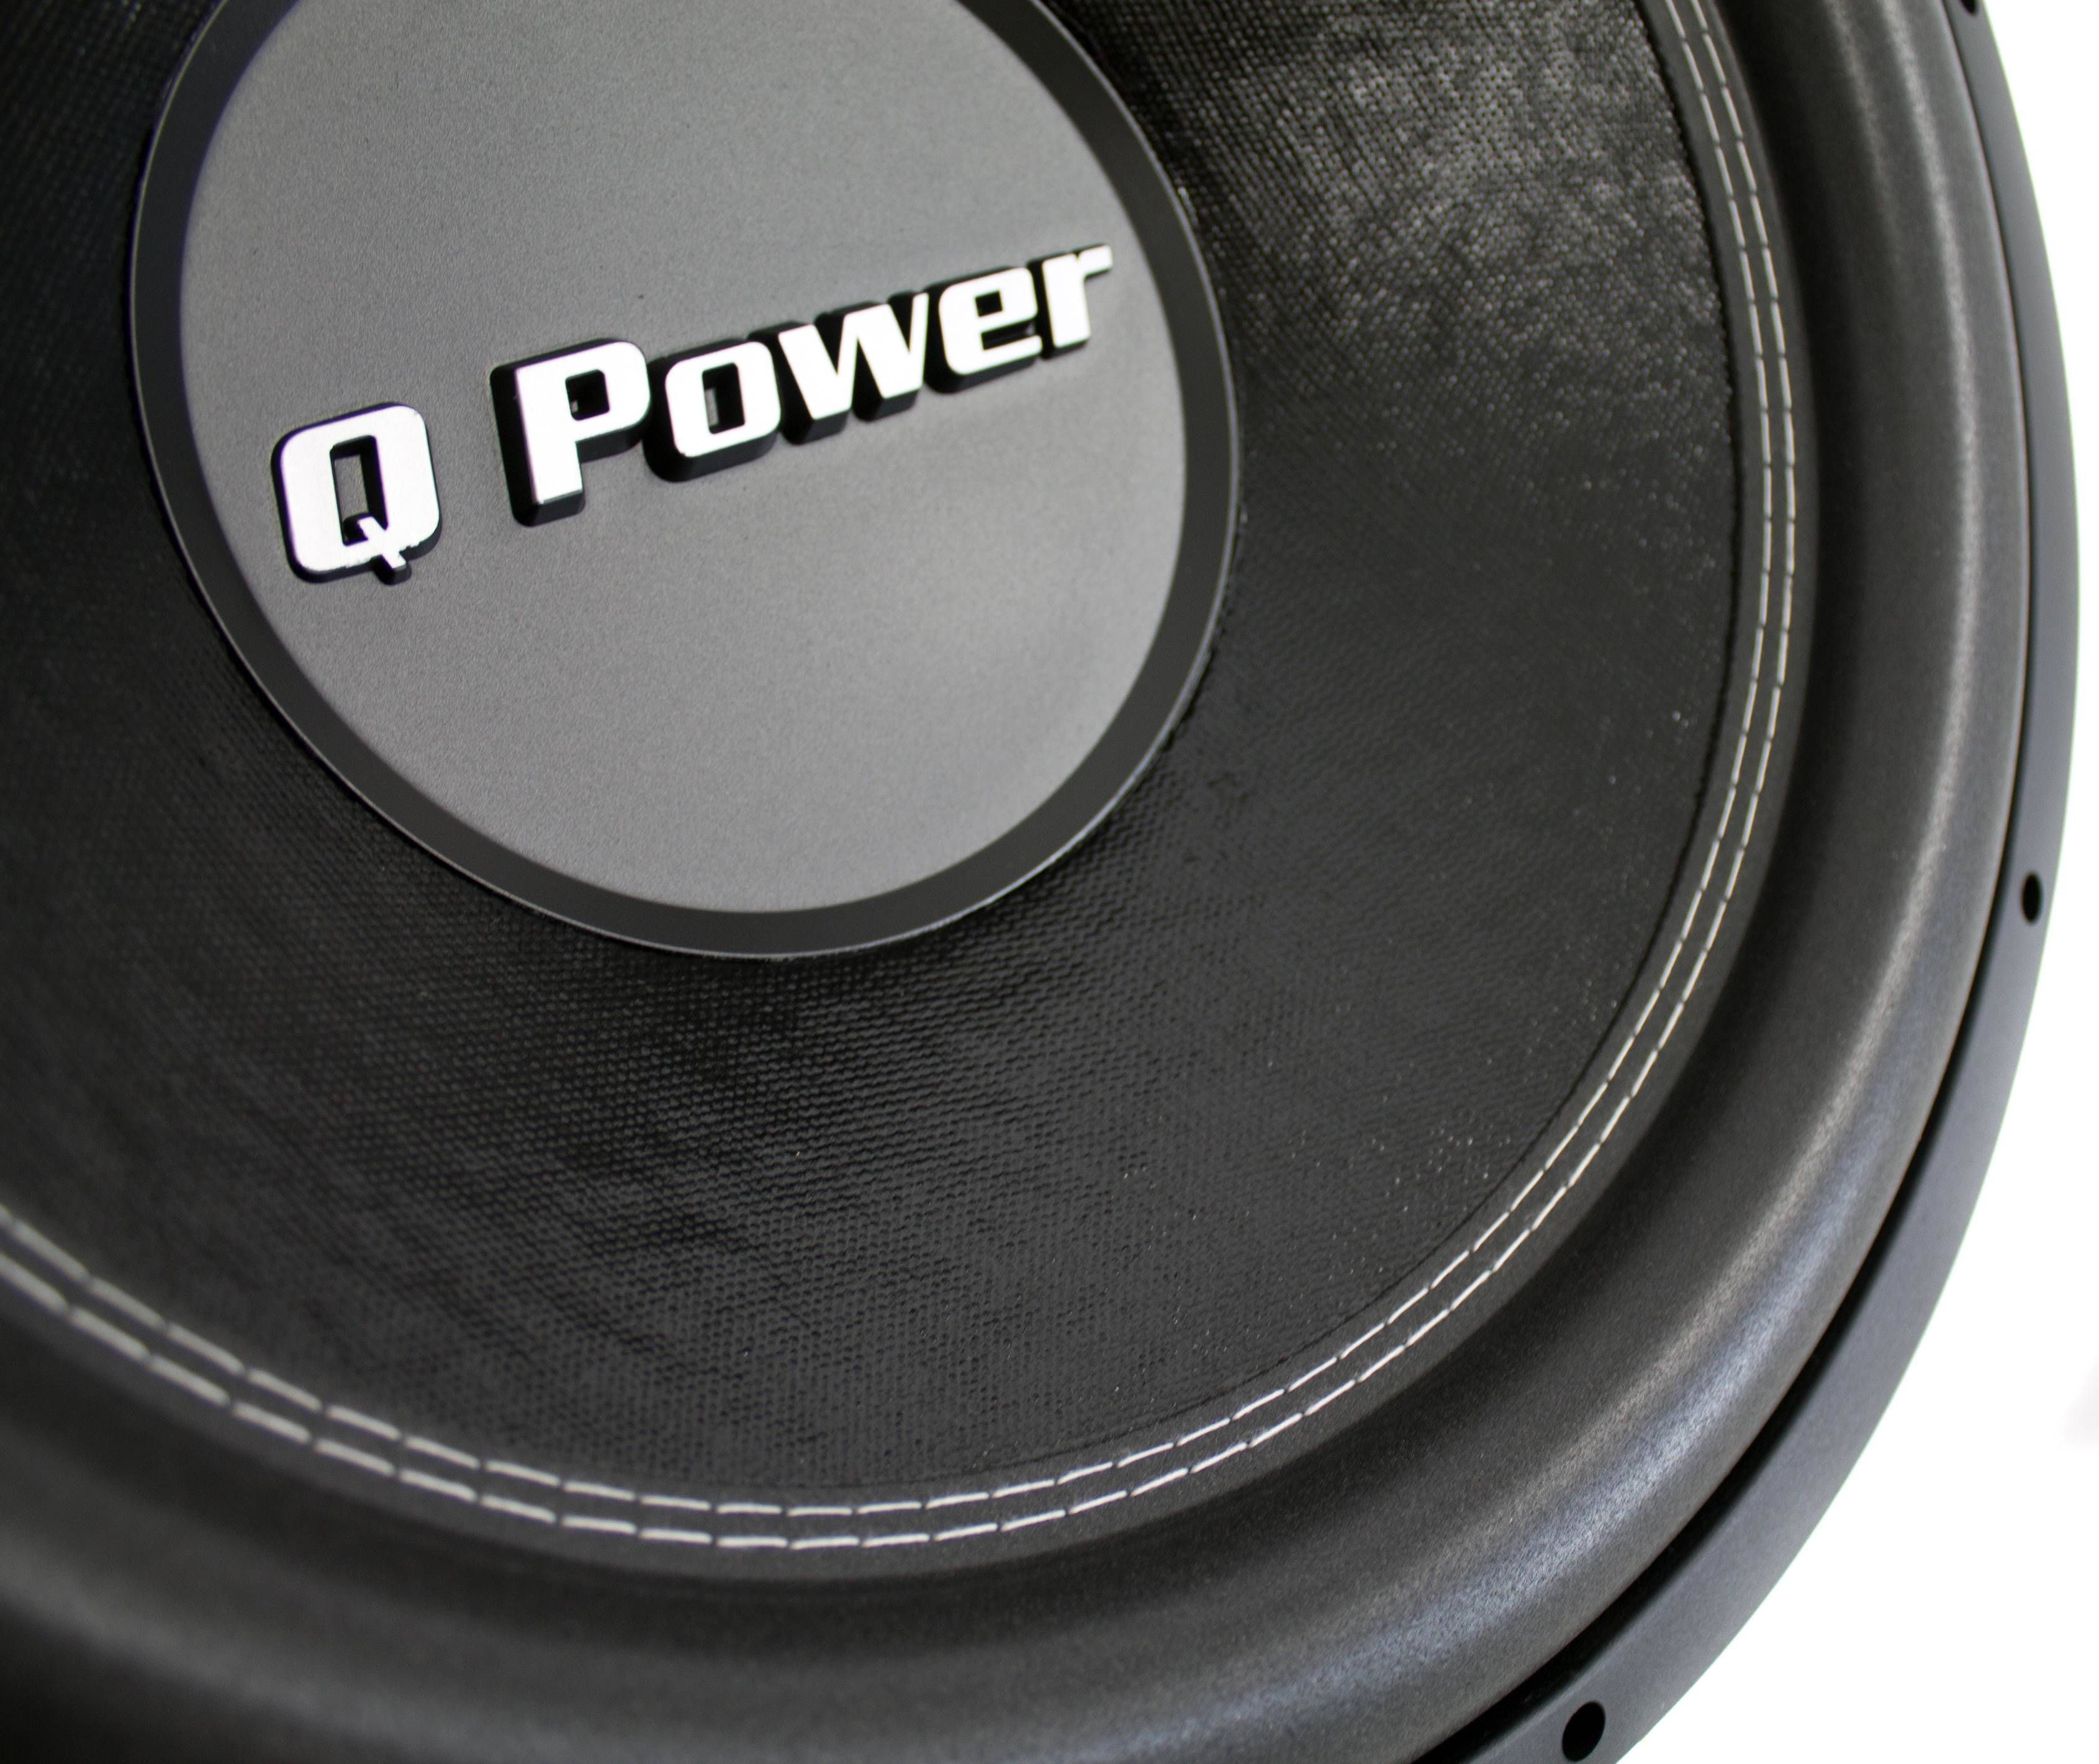 Q Power BASS15 The 15-Inch Q Power Subwoofer Box is Designed and Built for Deepest Bass 